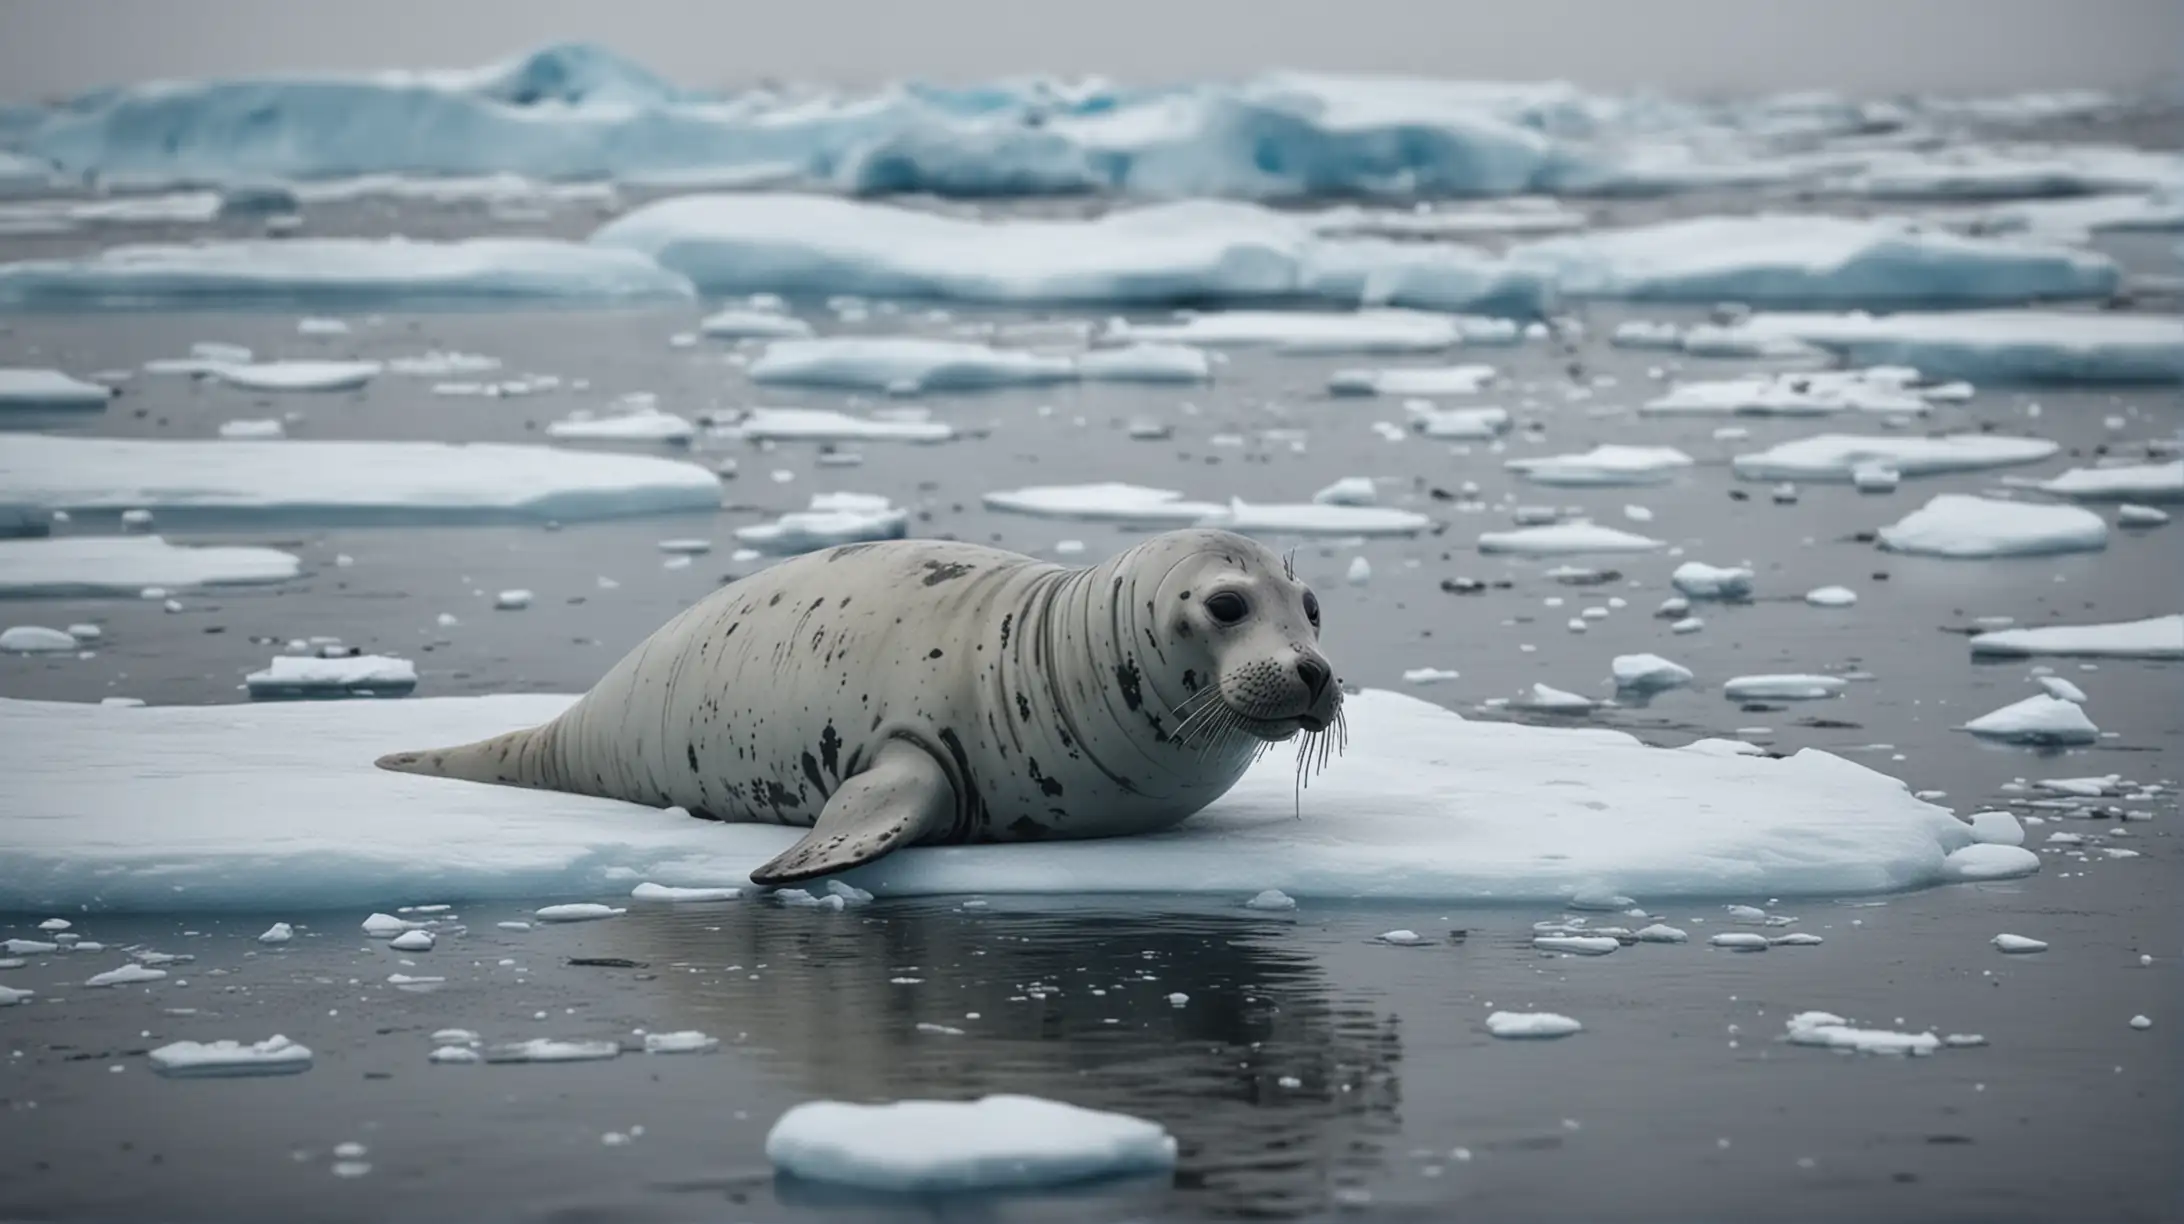 Seal Robot on Melting Ice in Antarctic